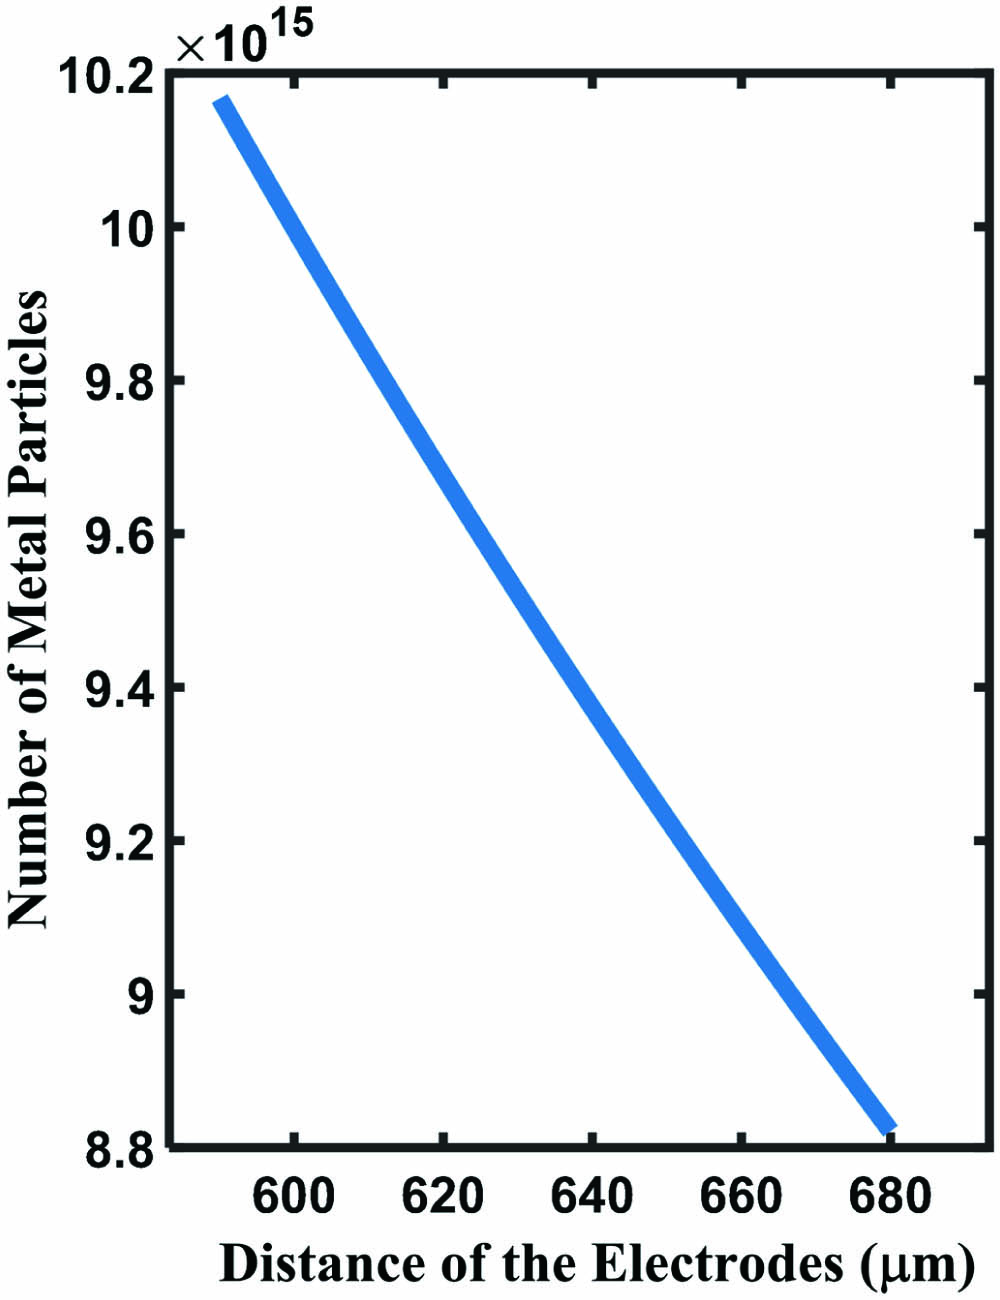 Relationship between the number of deposited particles and the distance of the electrodes.